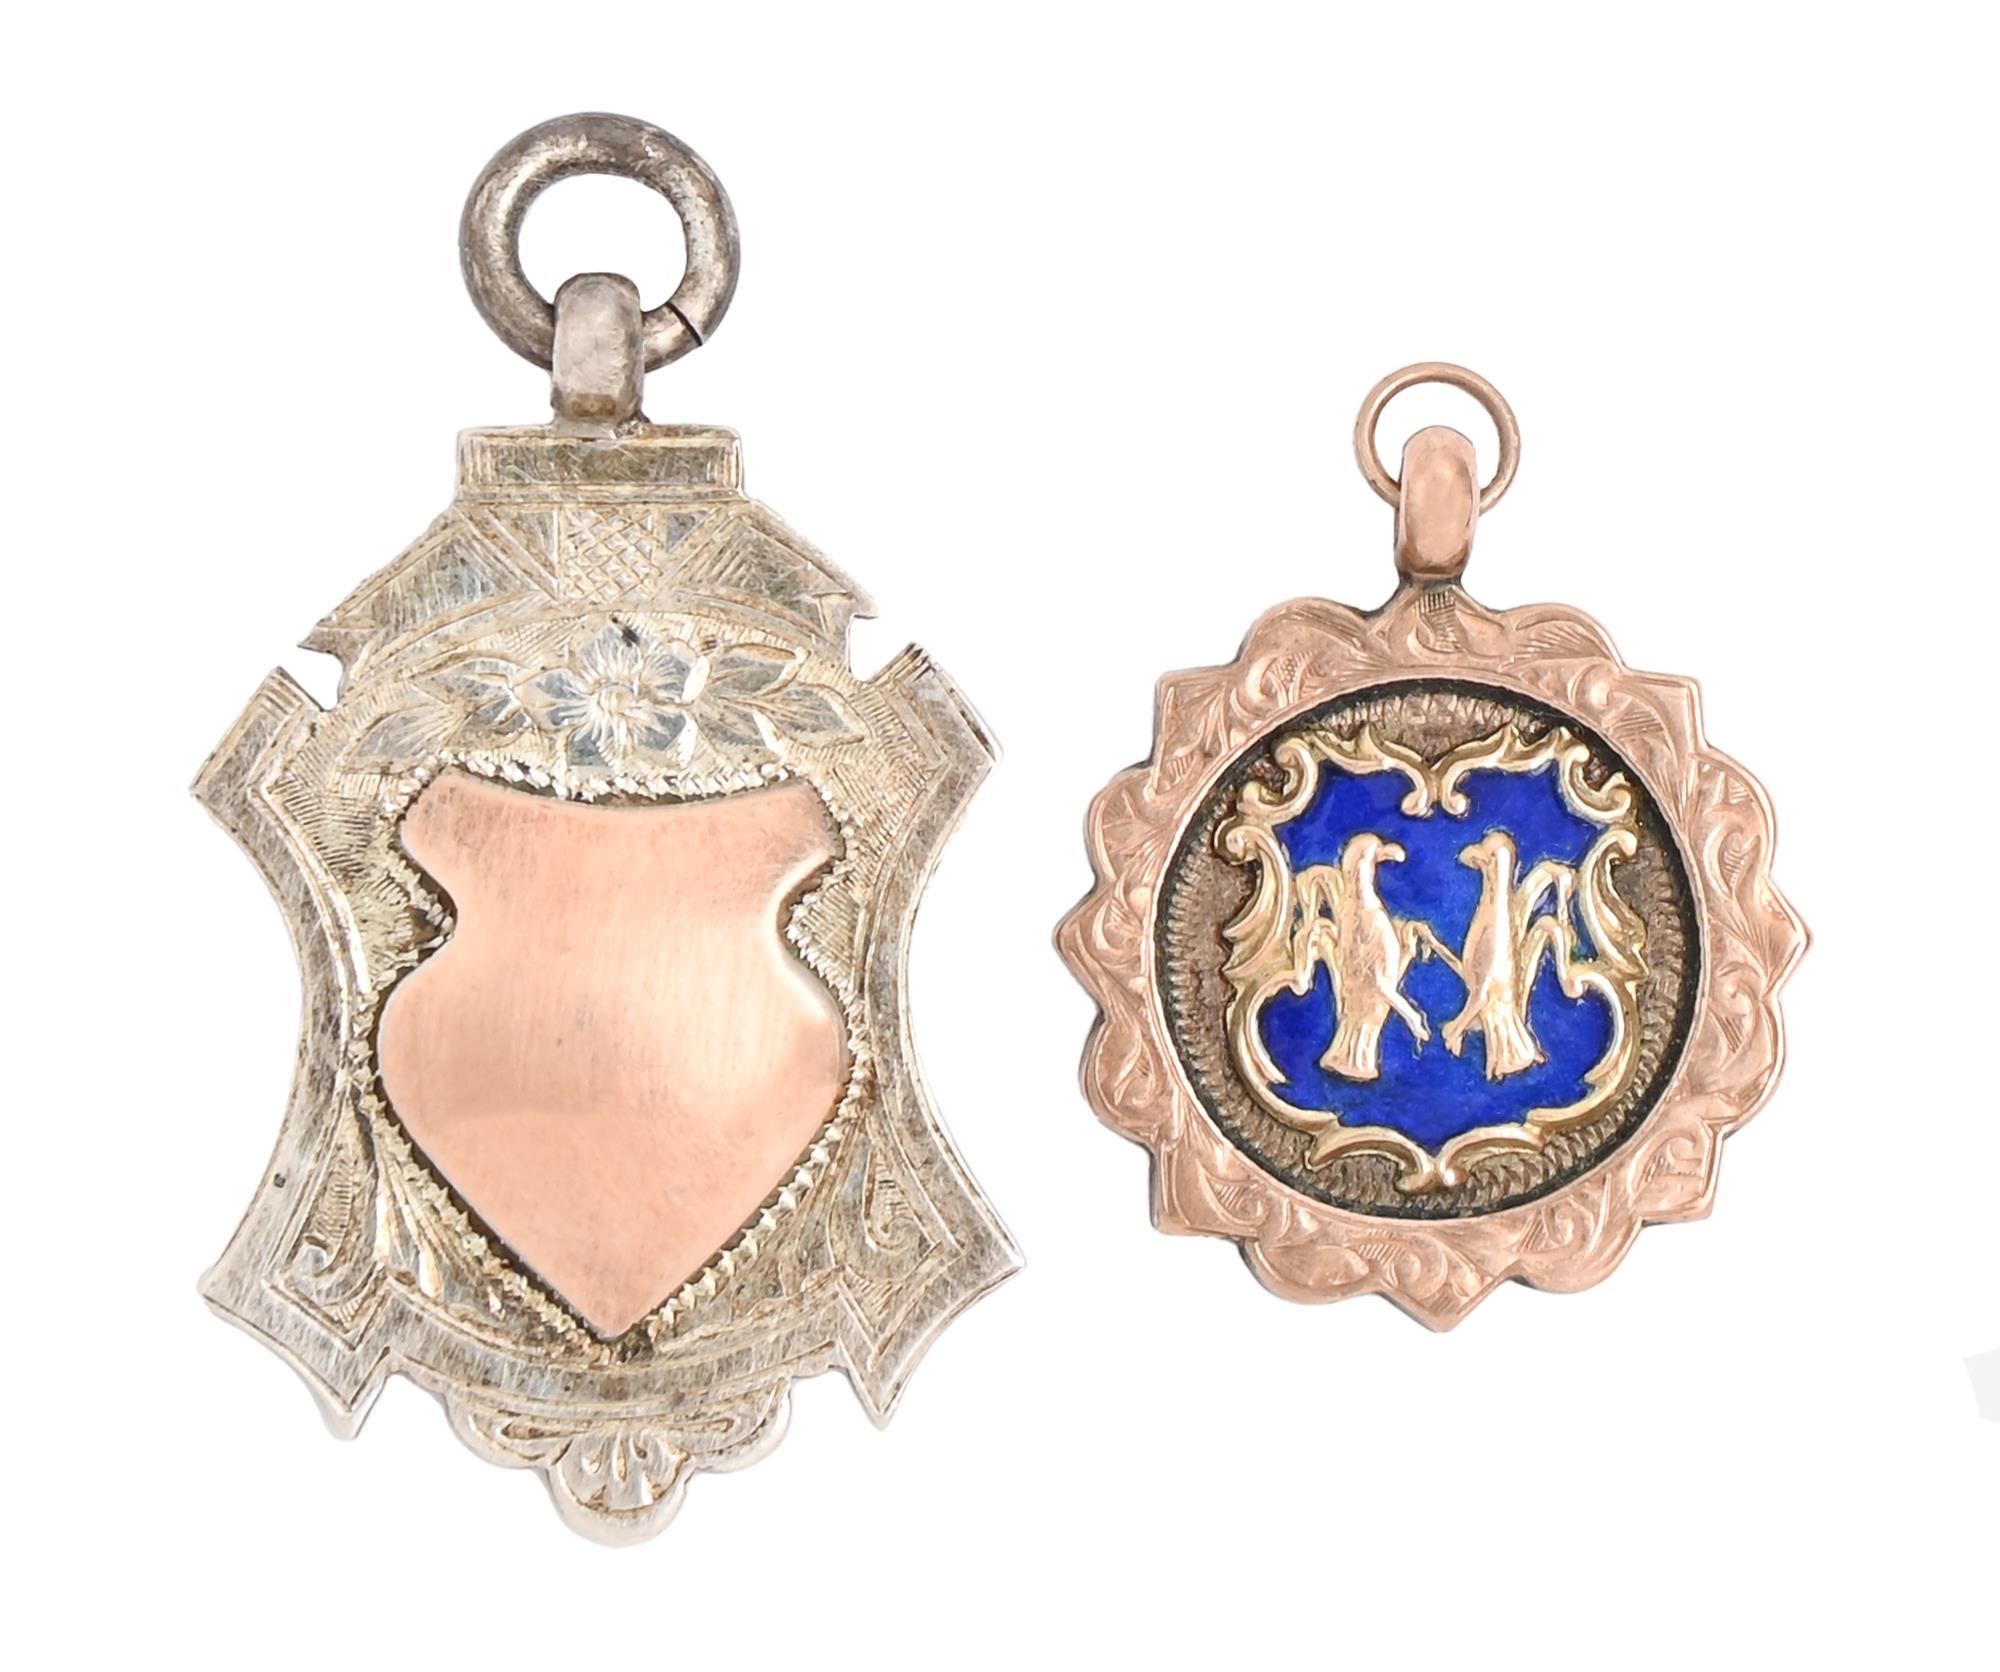 A 9ct gold and enamel sporting prize watch fob shield, the reverse engraved WINNERS 1912-13, 22mm